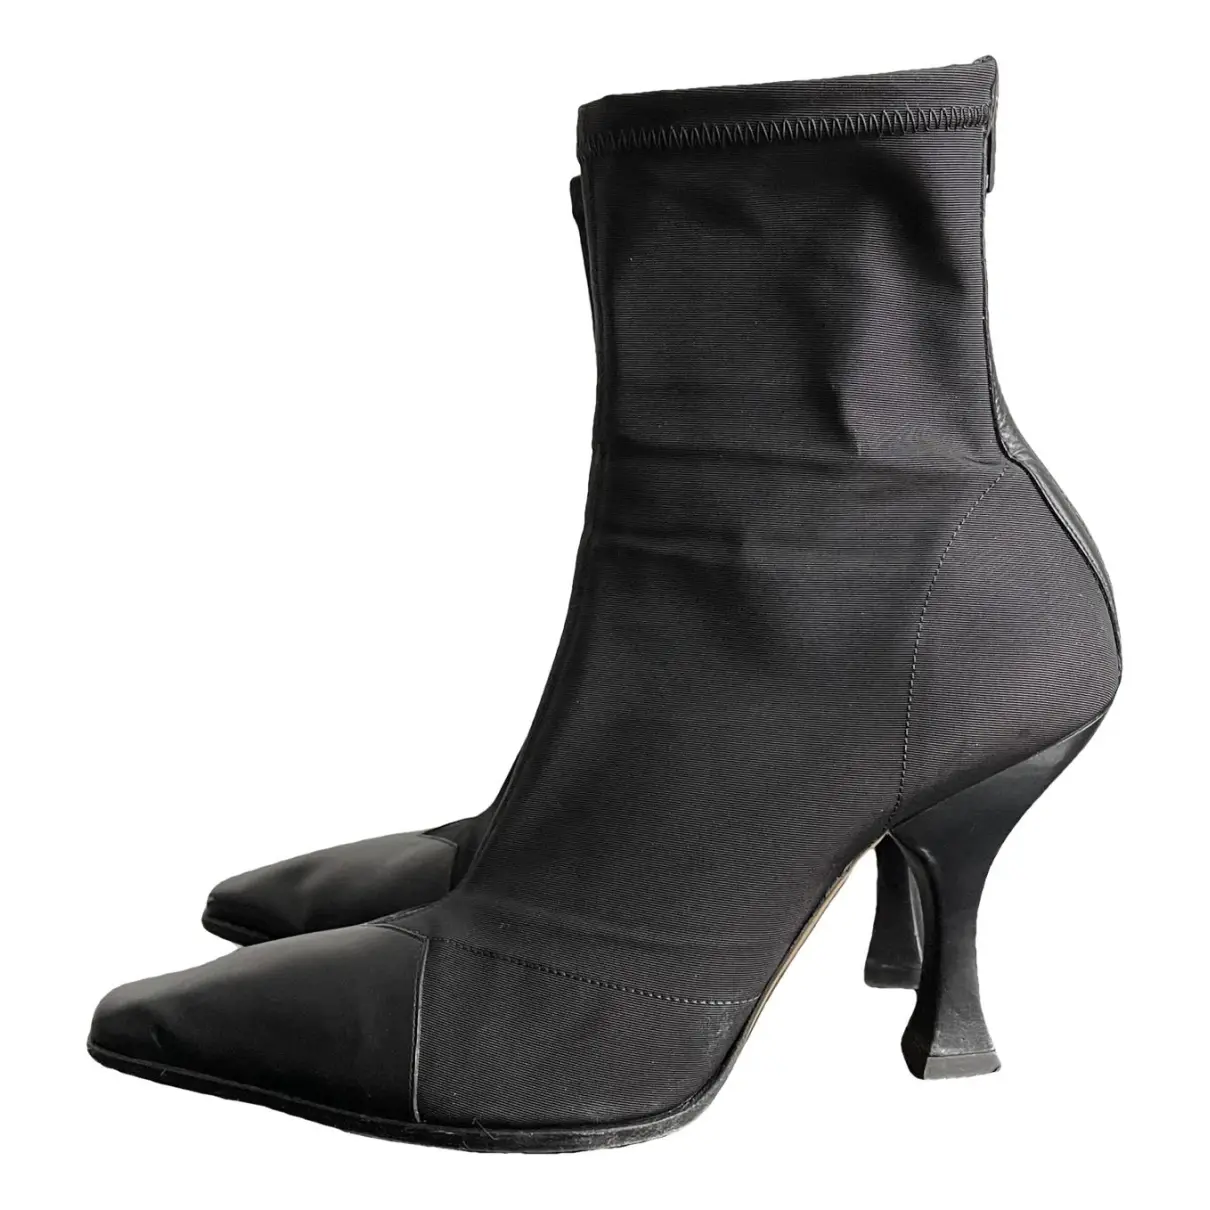 Madame leather ankle boots